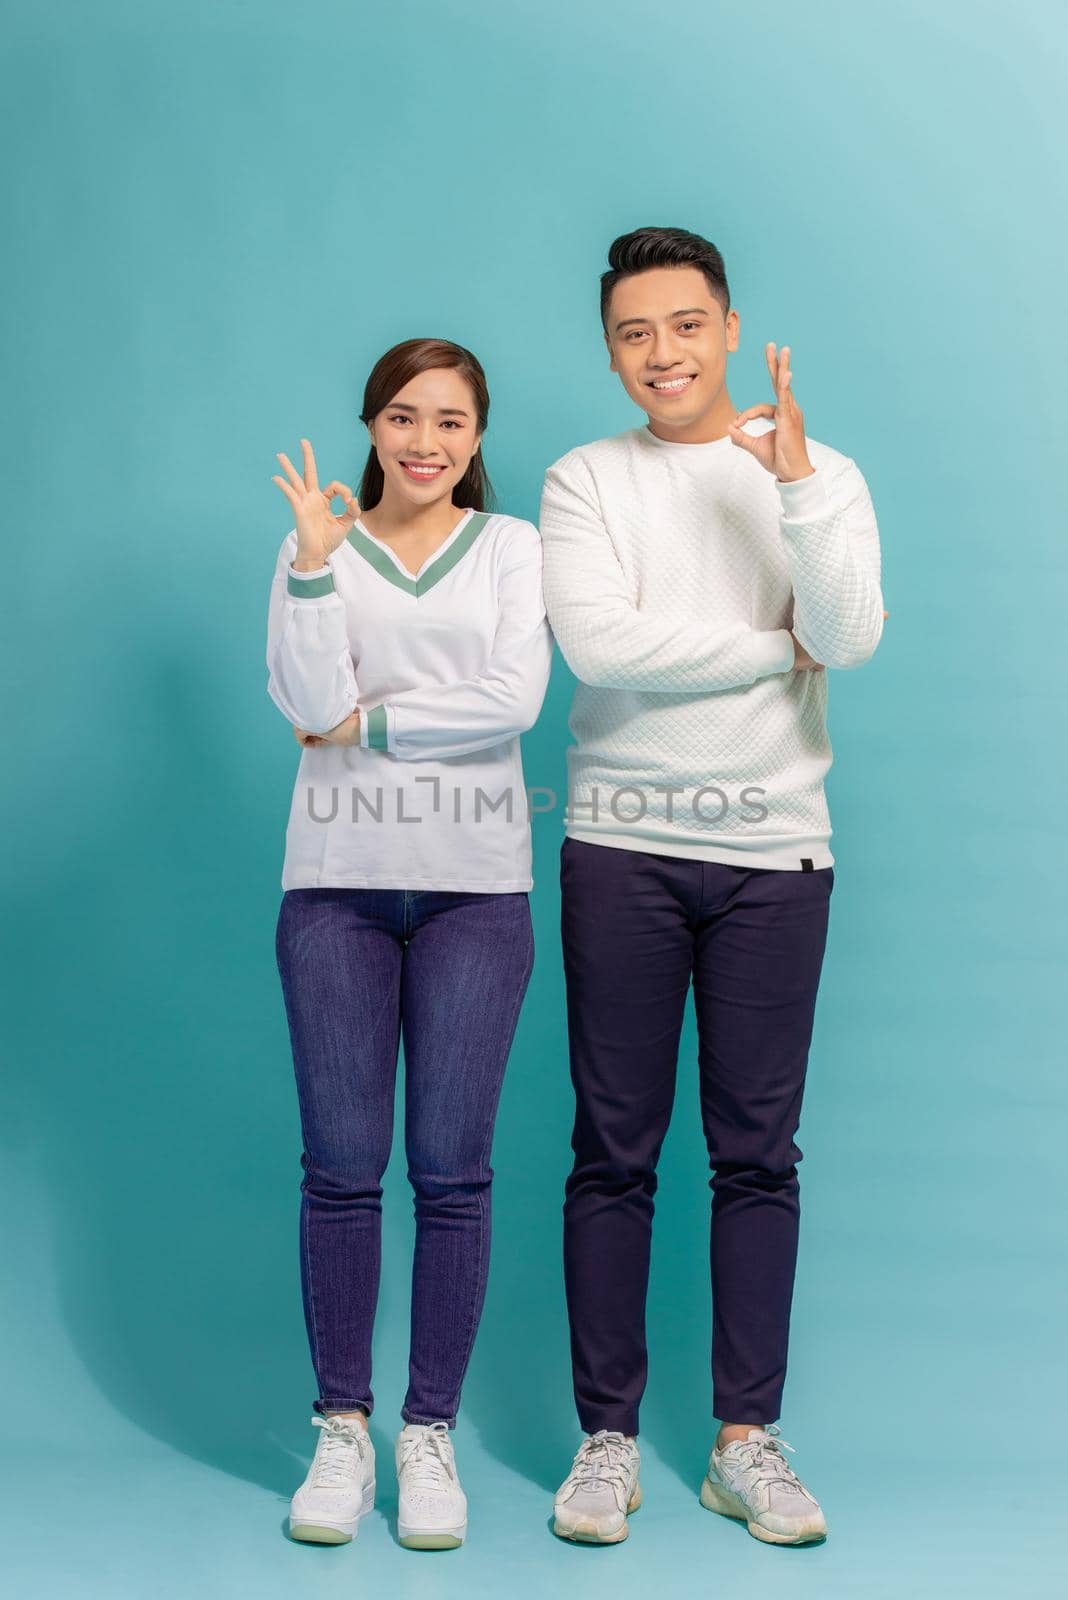 Happy Asian couple love excited smiling with ok hand gesture